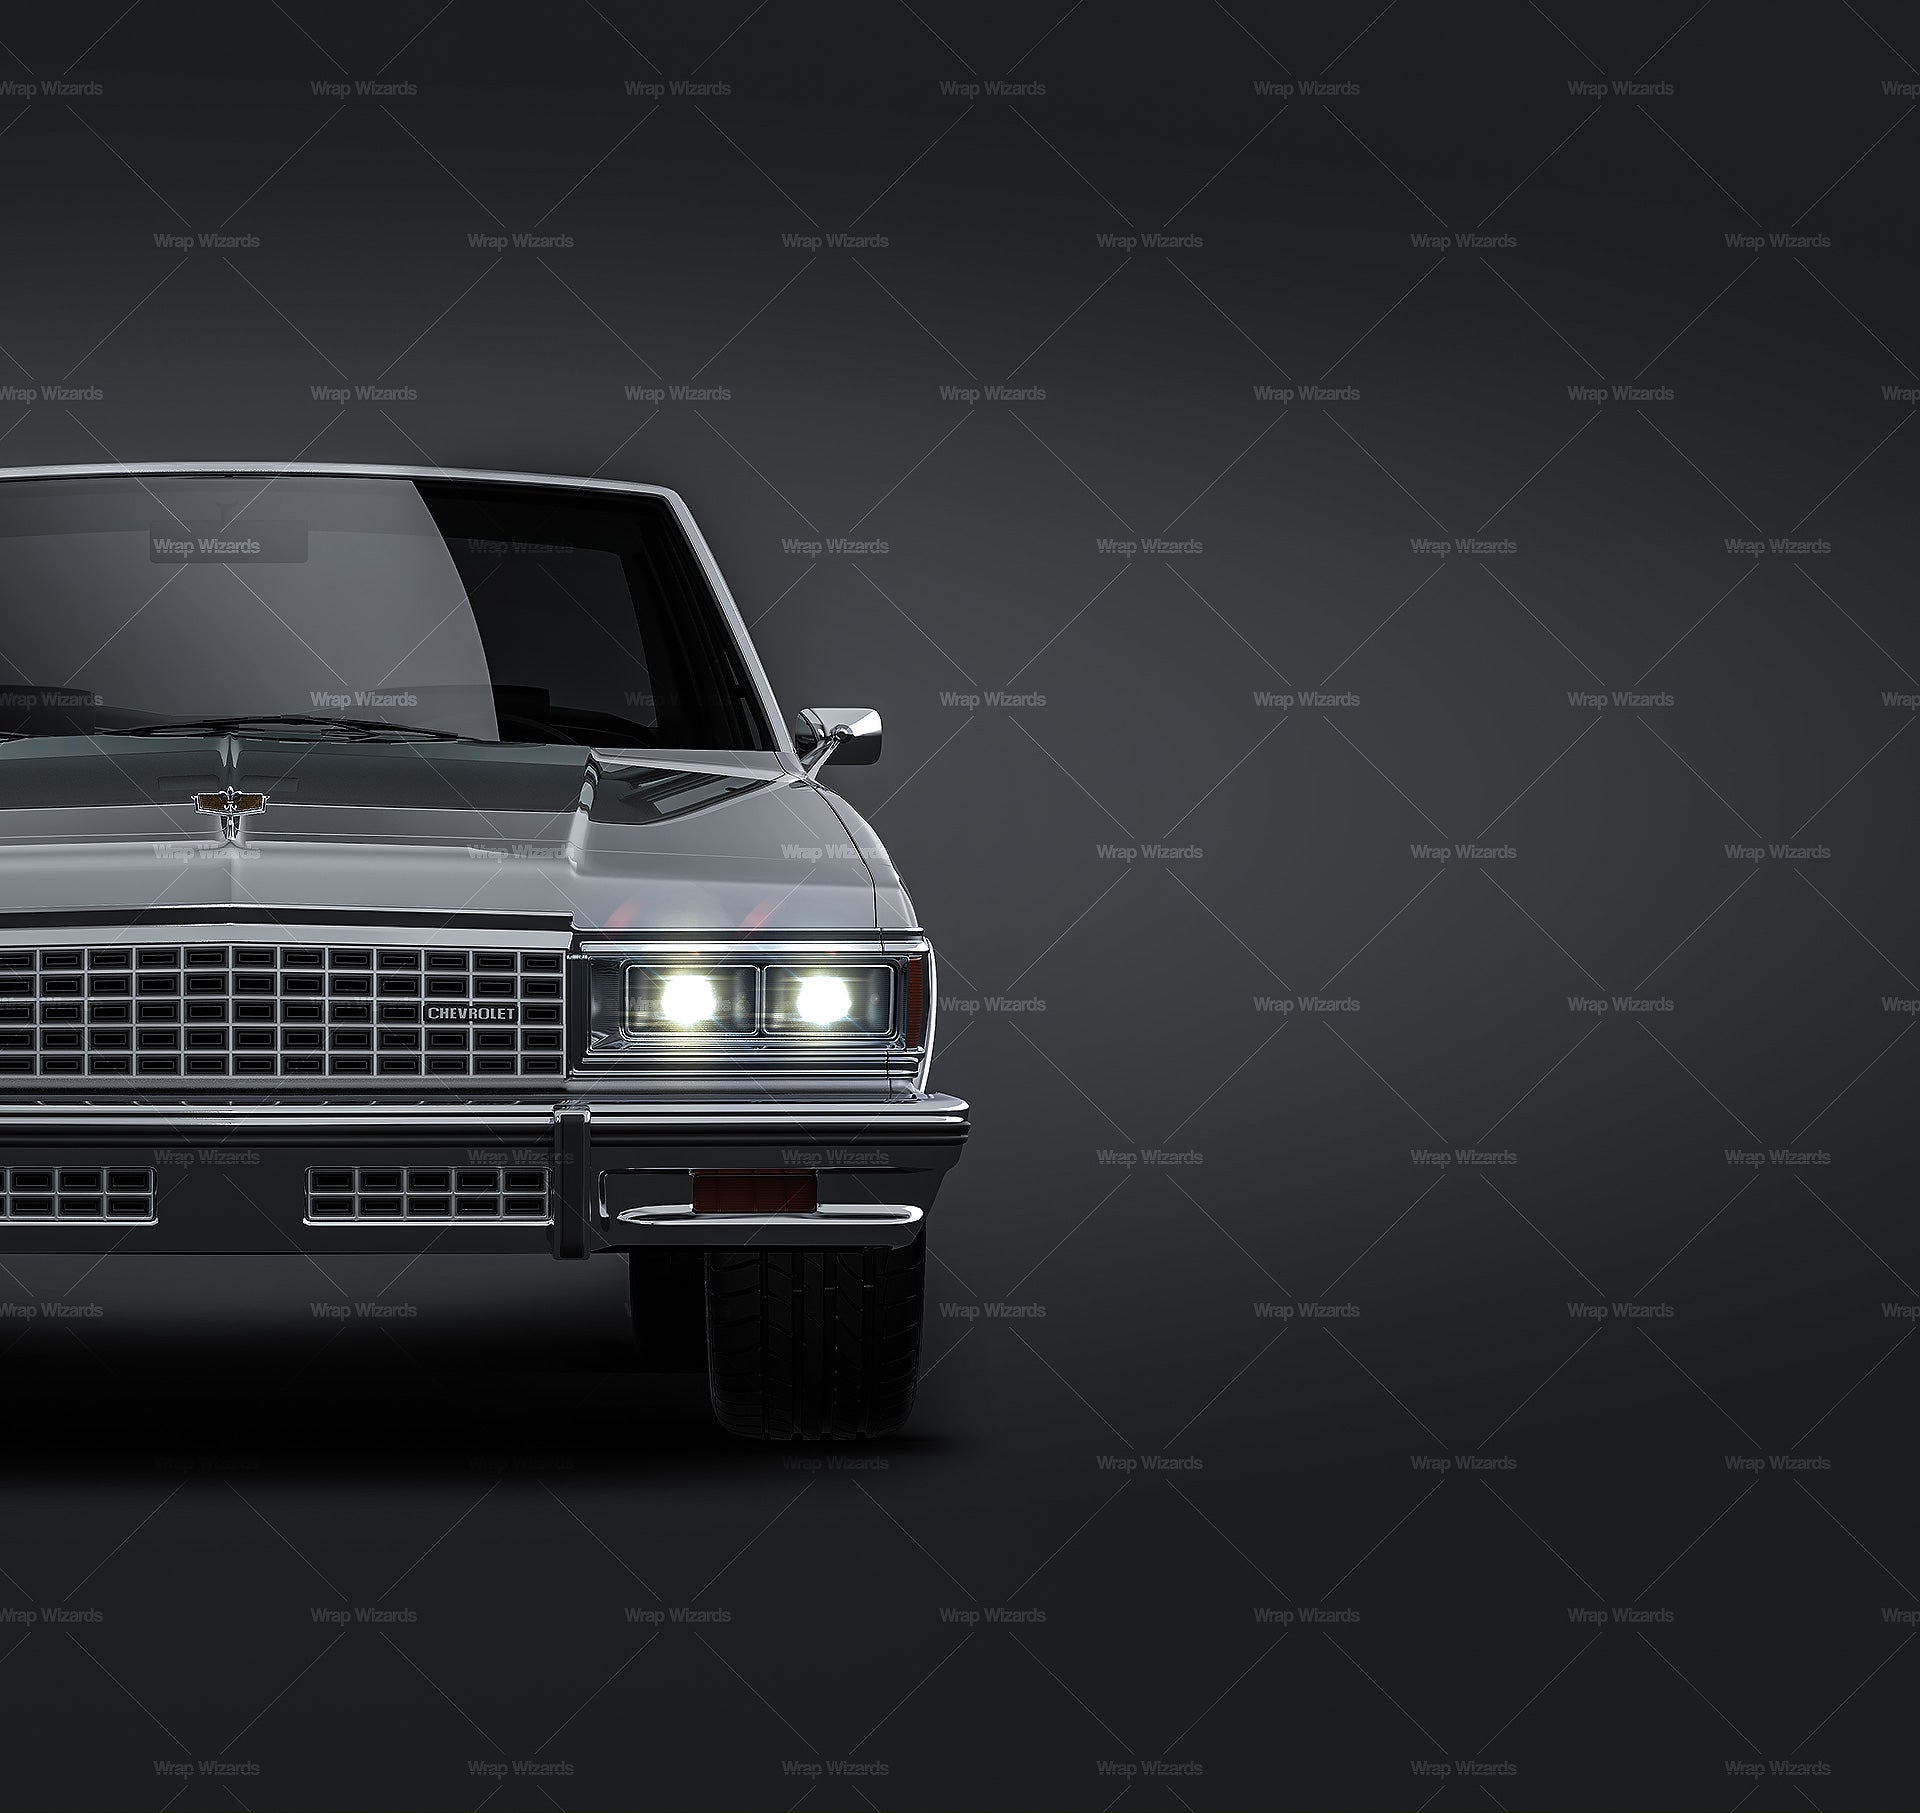 Chevrolet Caprice 1978 glossy finish - all sides Car Mockup Template.psd